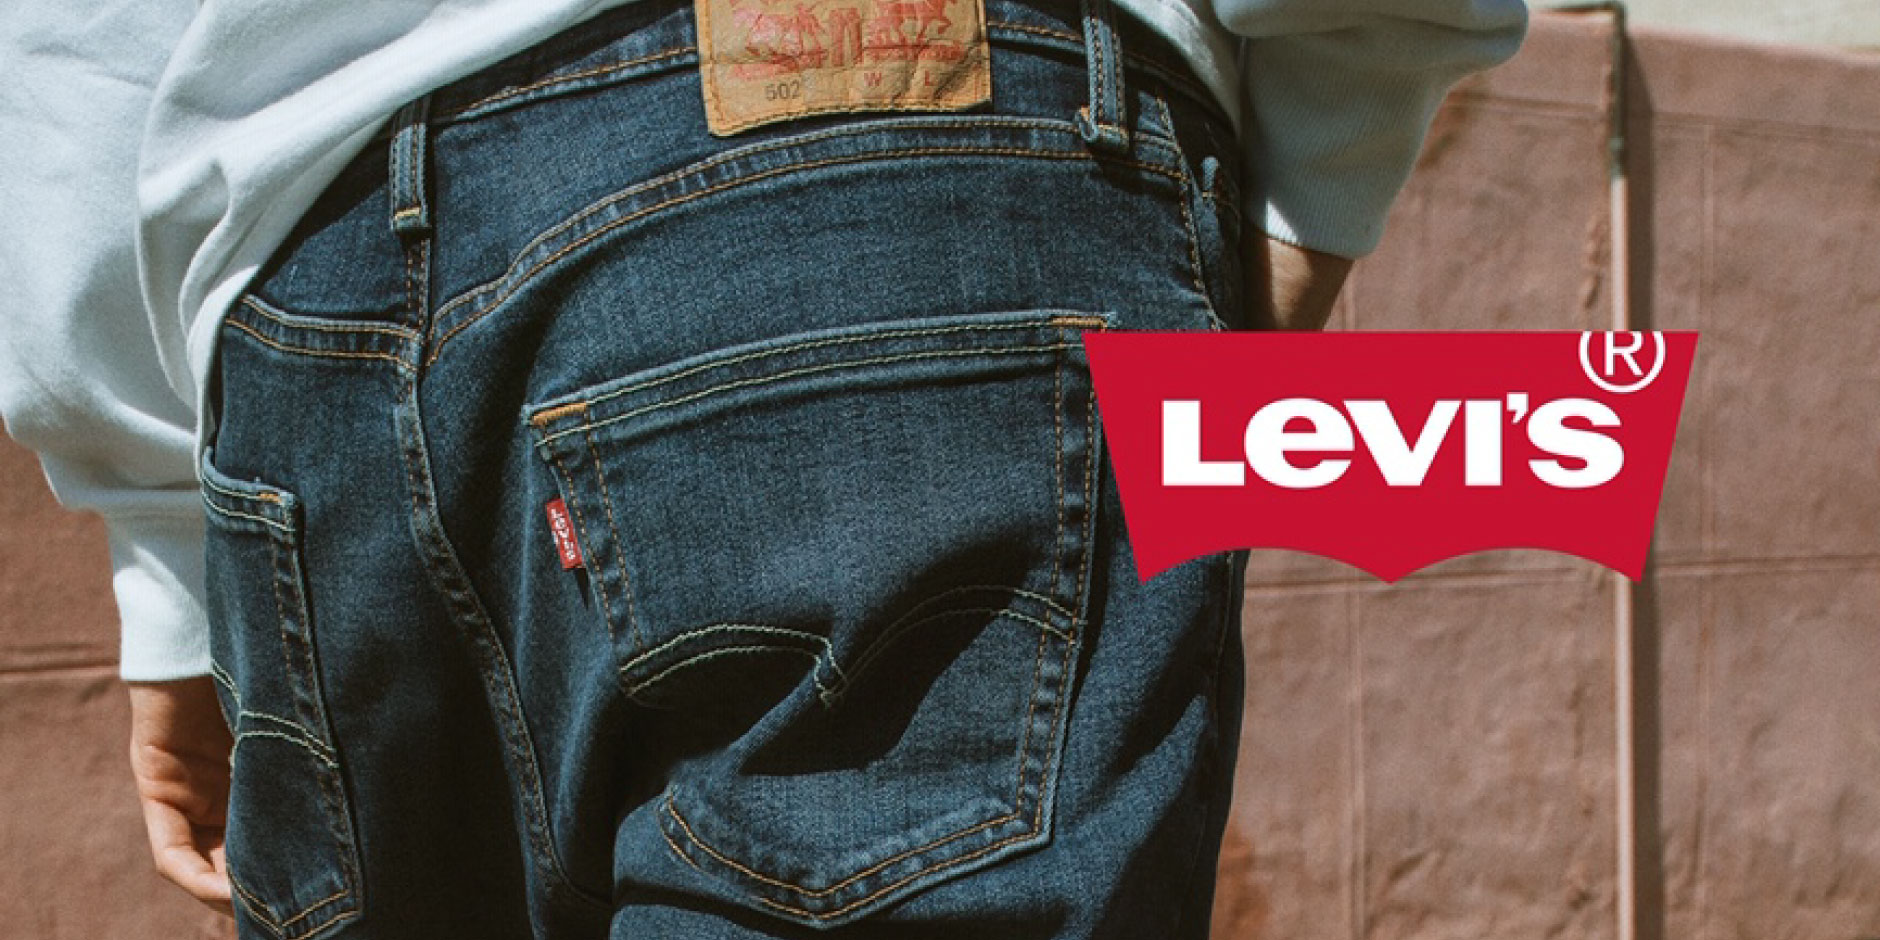 LEVI'S Leather Label On The Blue Jeans. LEVI'S Is A Brand Name Of Levi  Strauss And Co, Founded In 1853 Stock Photo, Picture and Royalty Free  Image. Image 66995037.